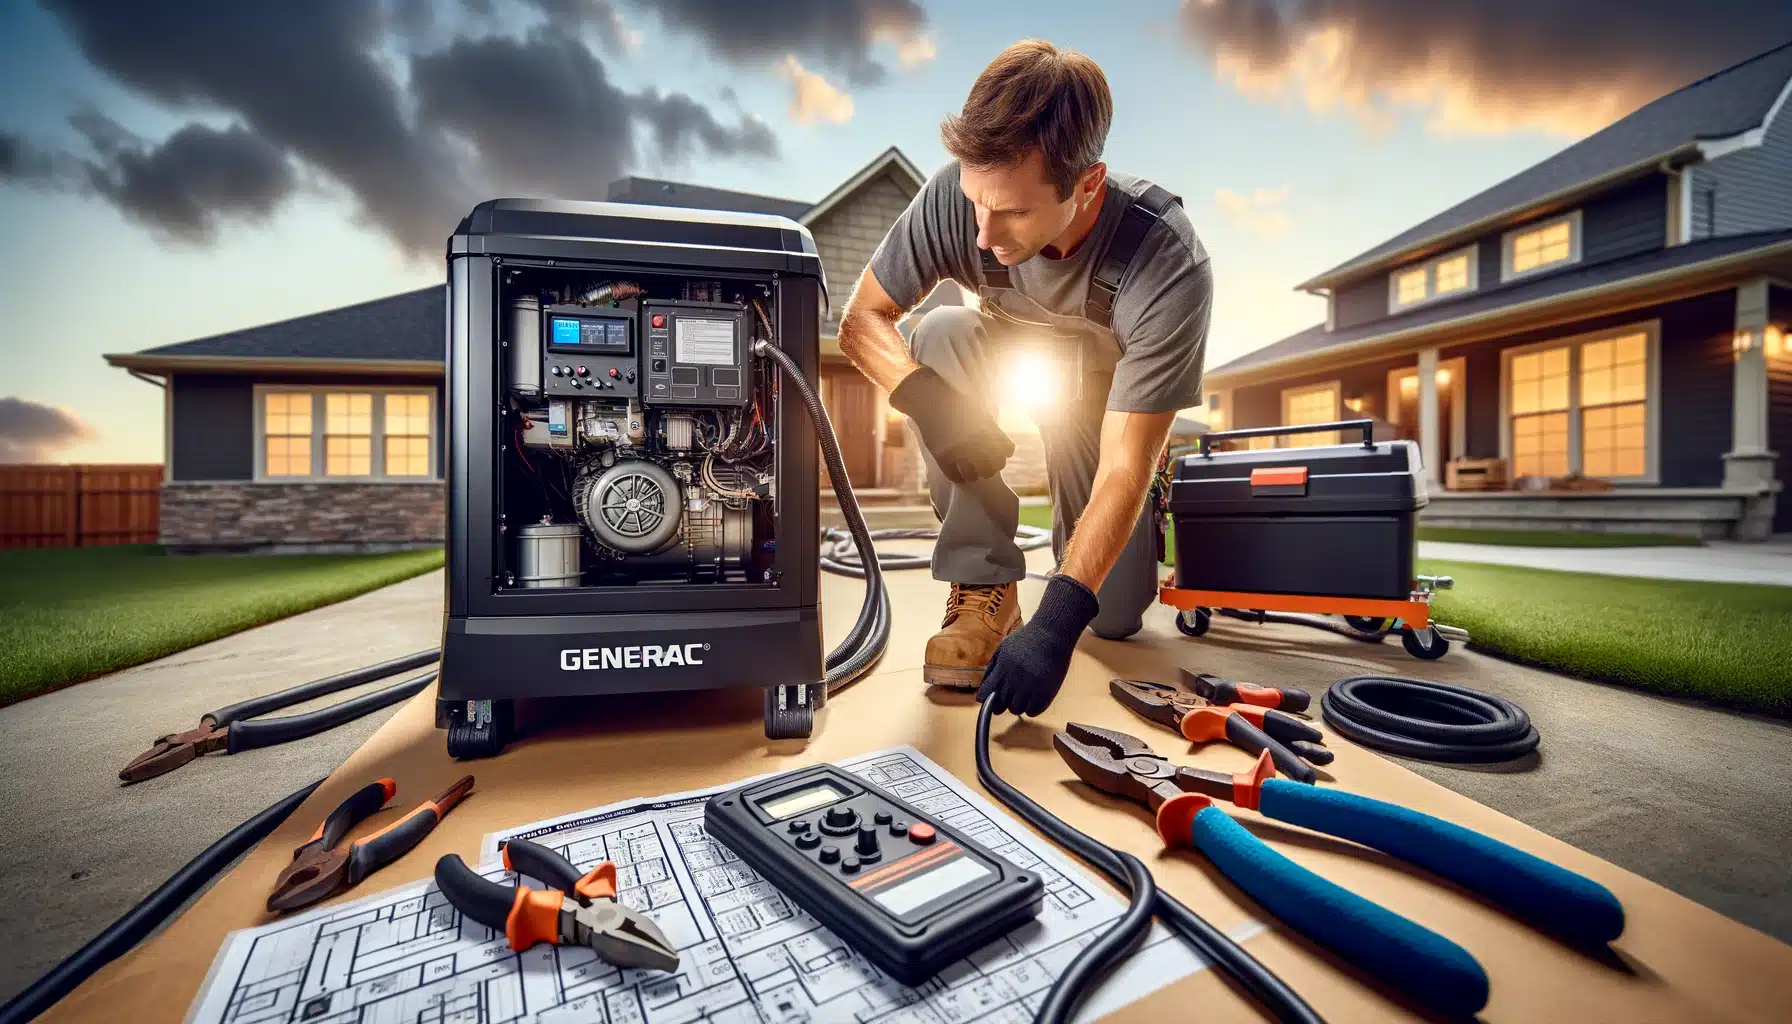 Generac Generator Installer: Ensuring Reliable Power for Your Home in Midland, Michigan